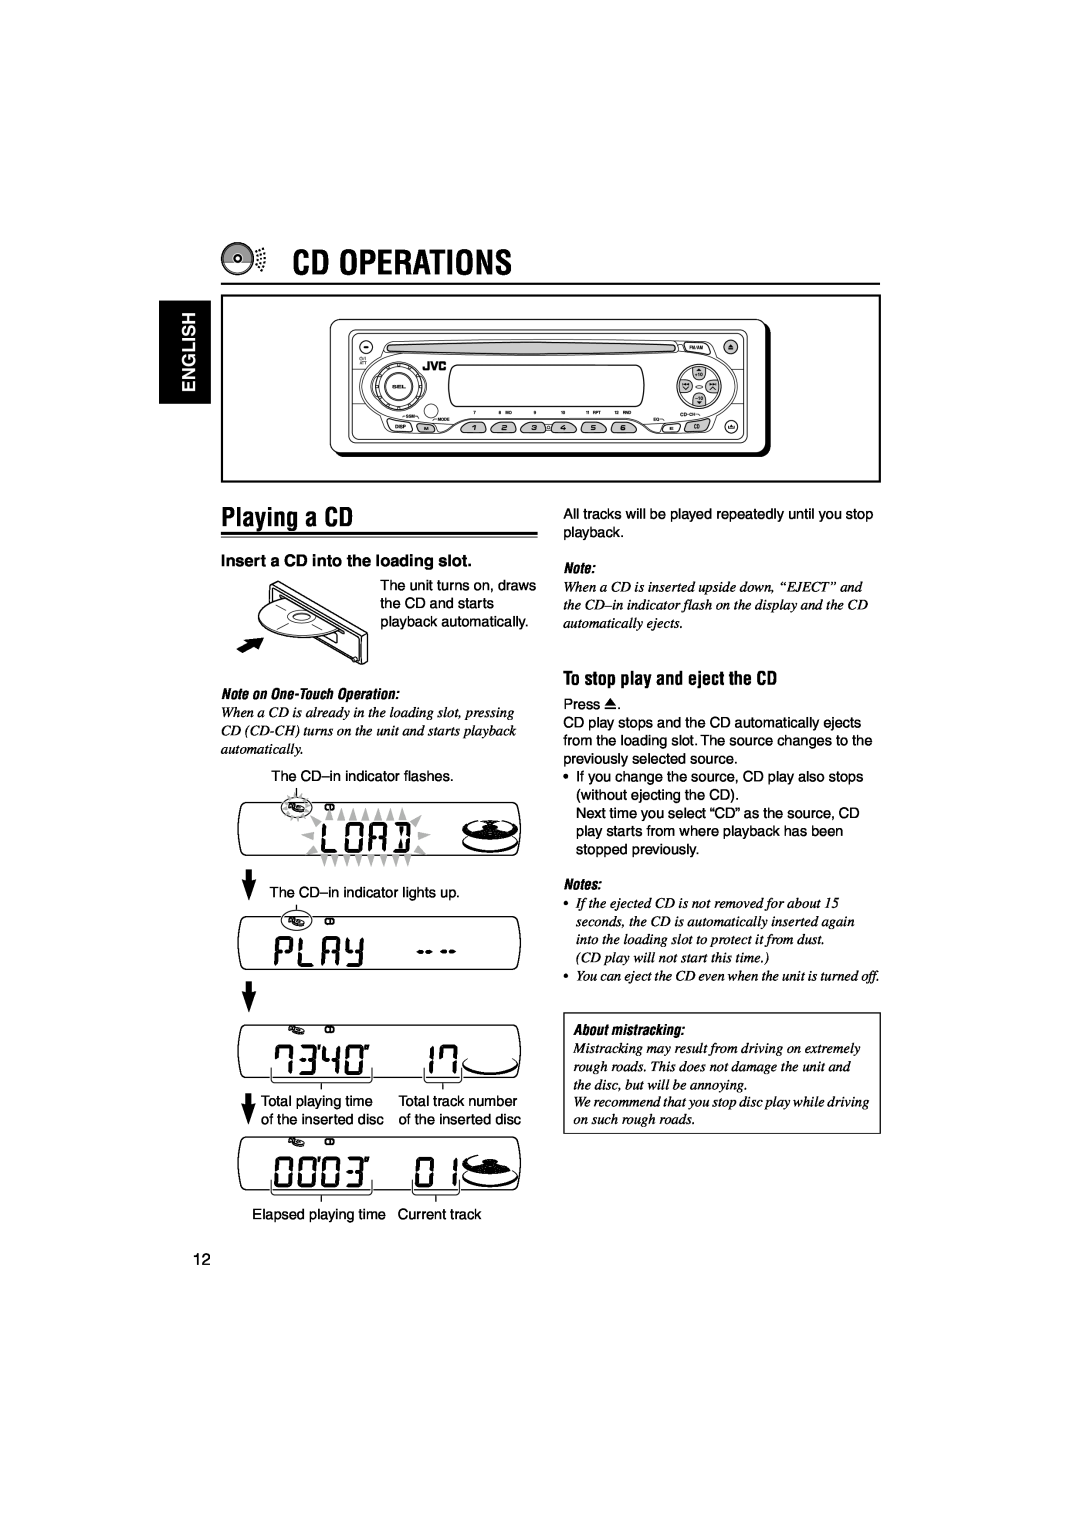 JVC KD-SX745 manual Cd Operations, Playing a CD, English, To stop play and eject the CD, Insert a CD into the loading slot 